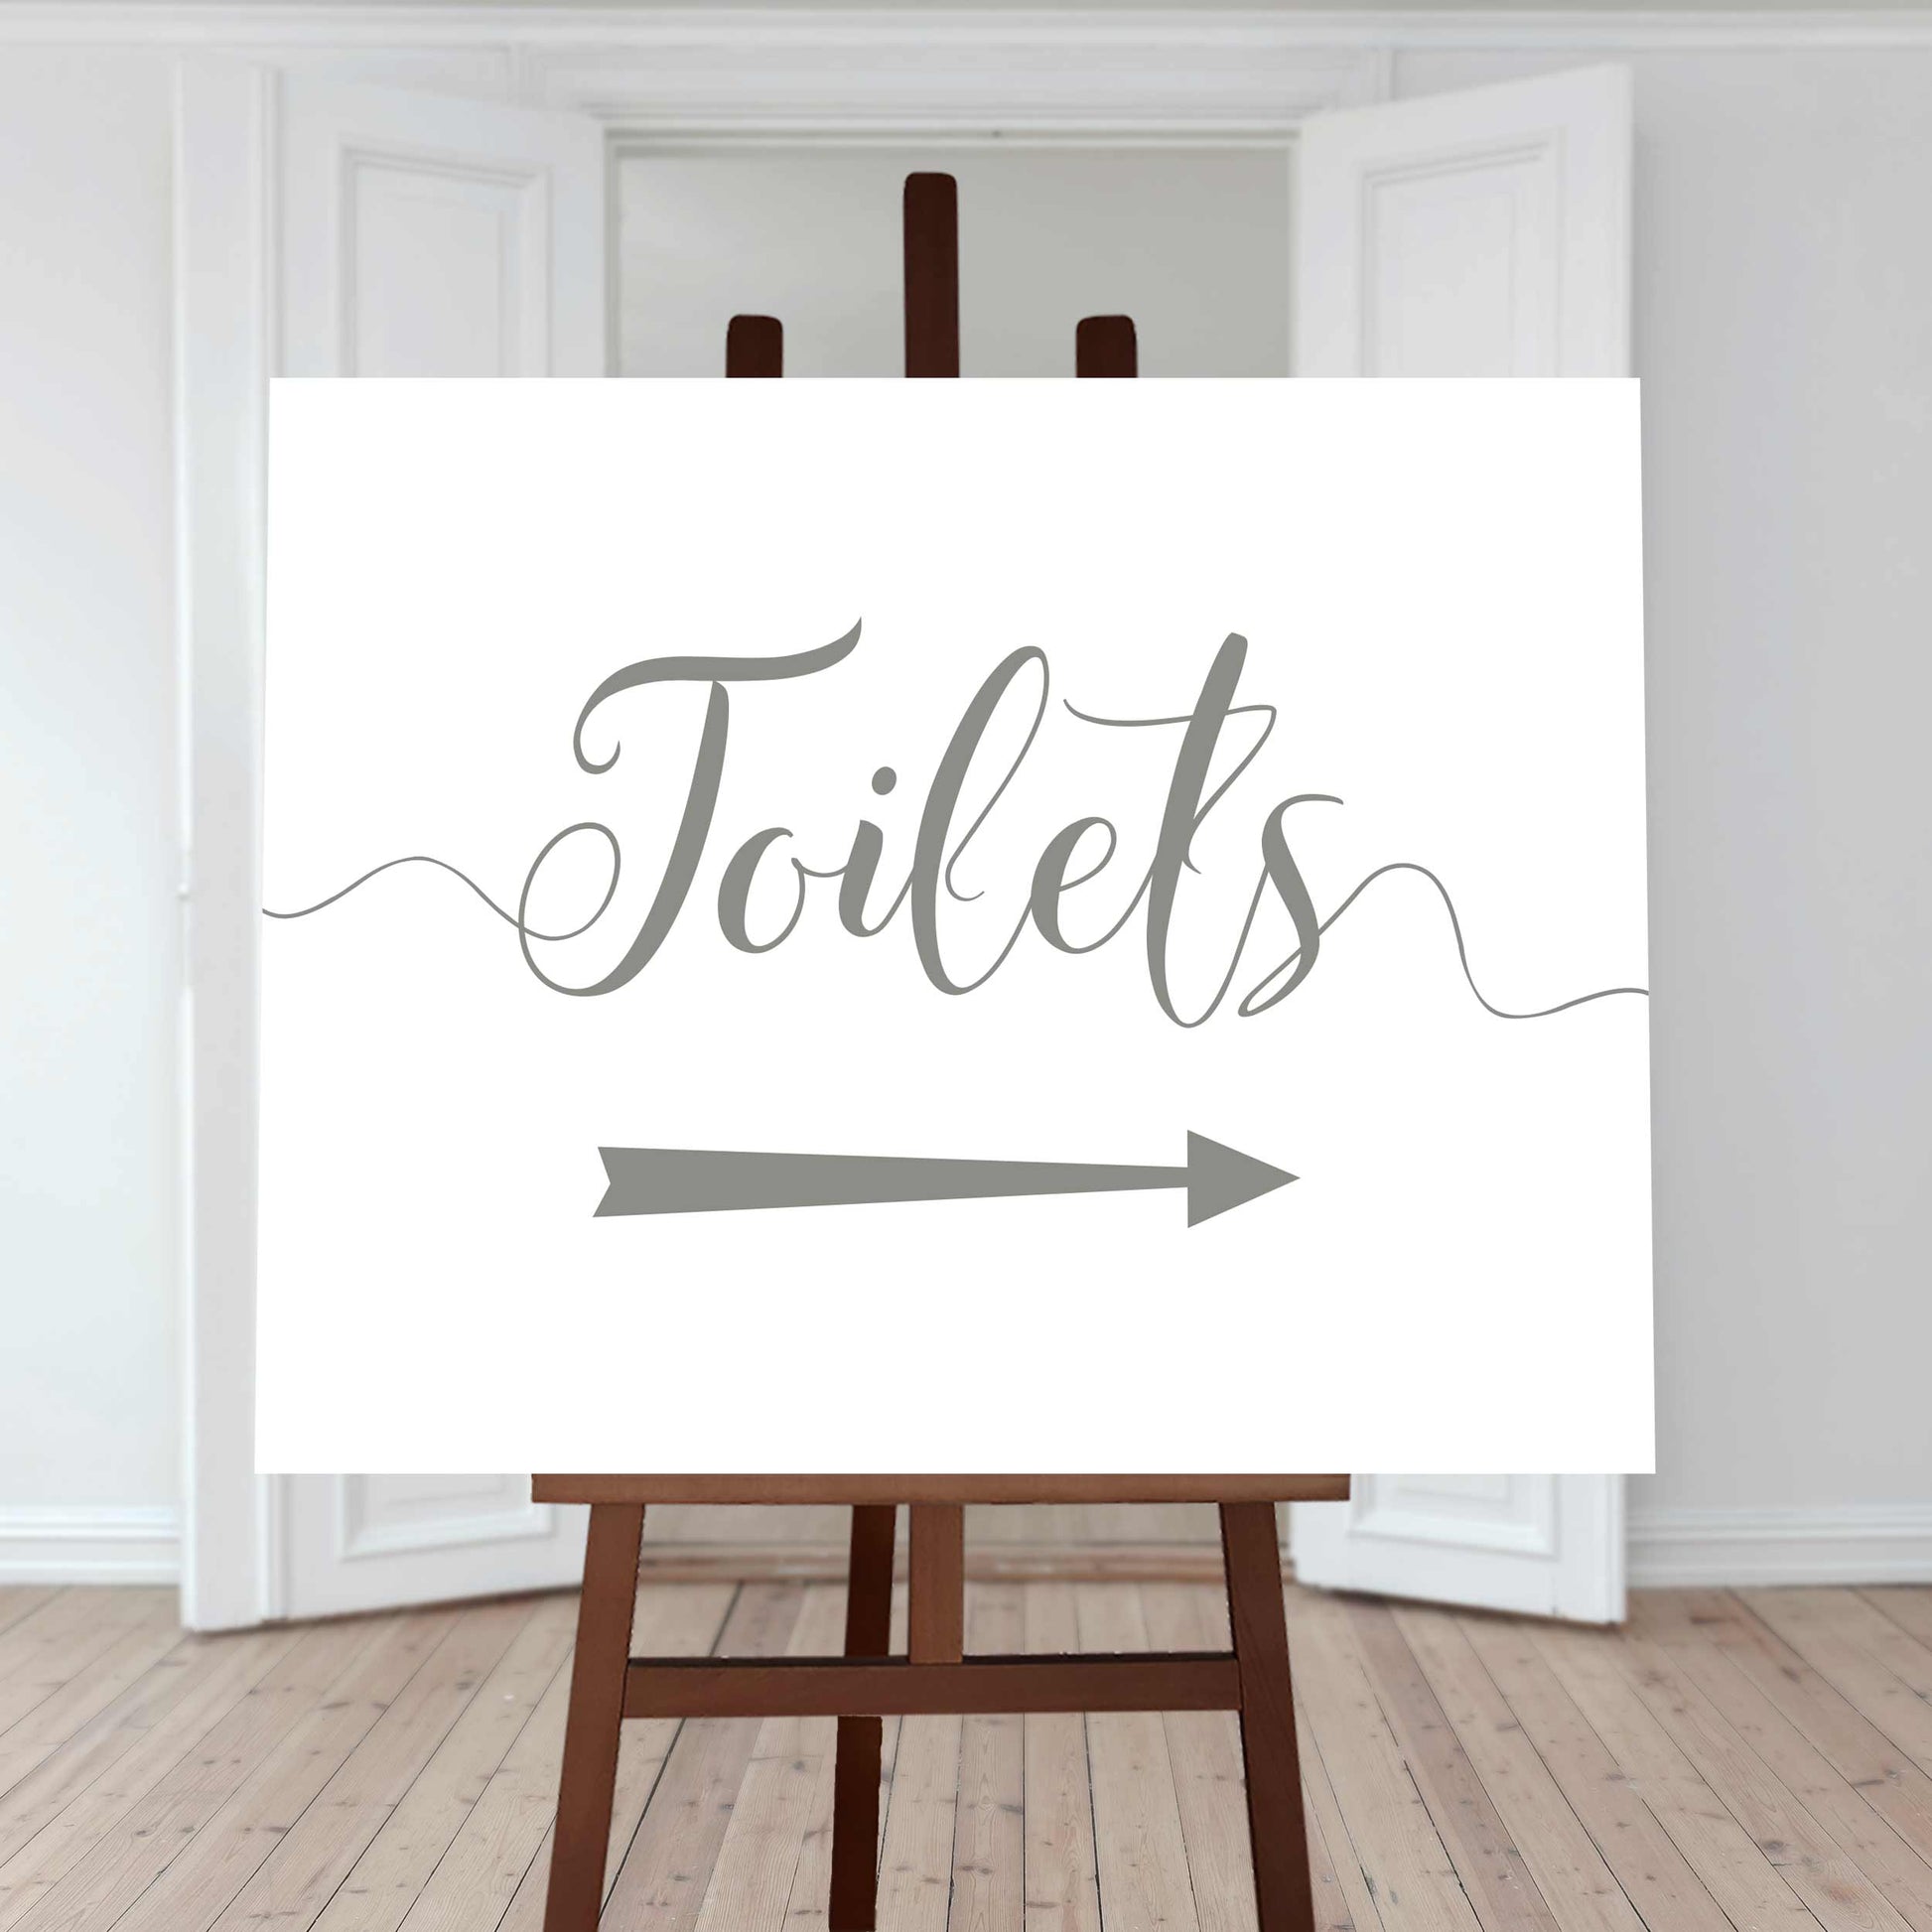 sage green wedding toilet directions sign with an arrow pointing right